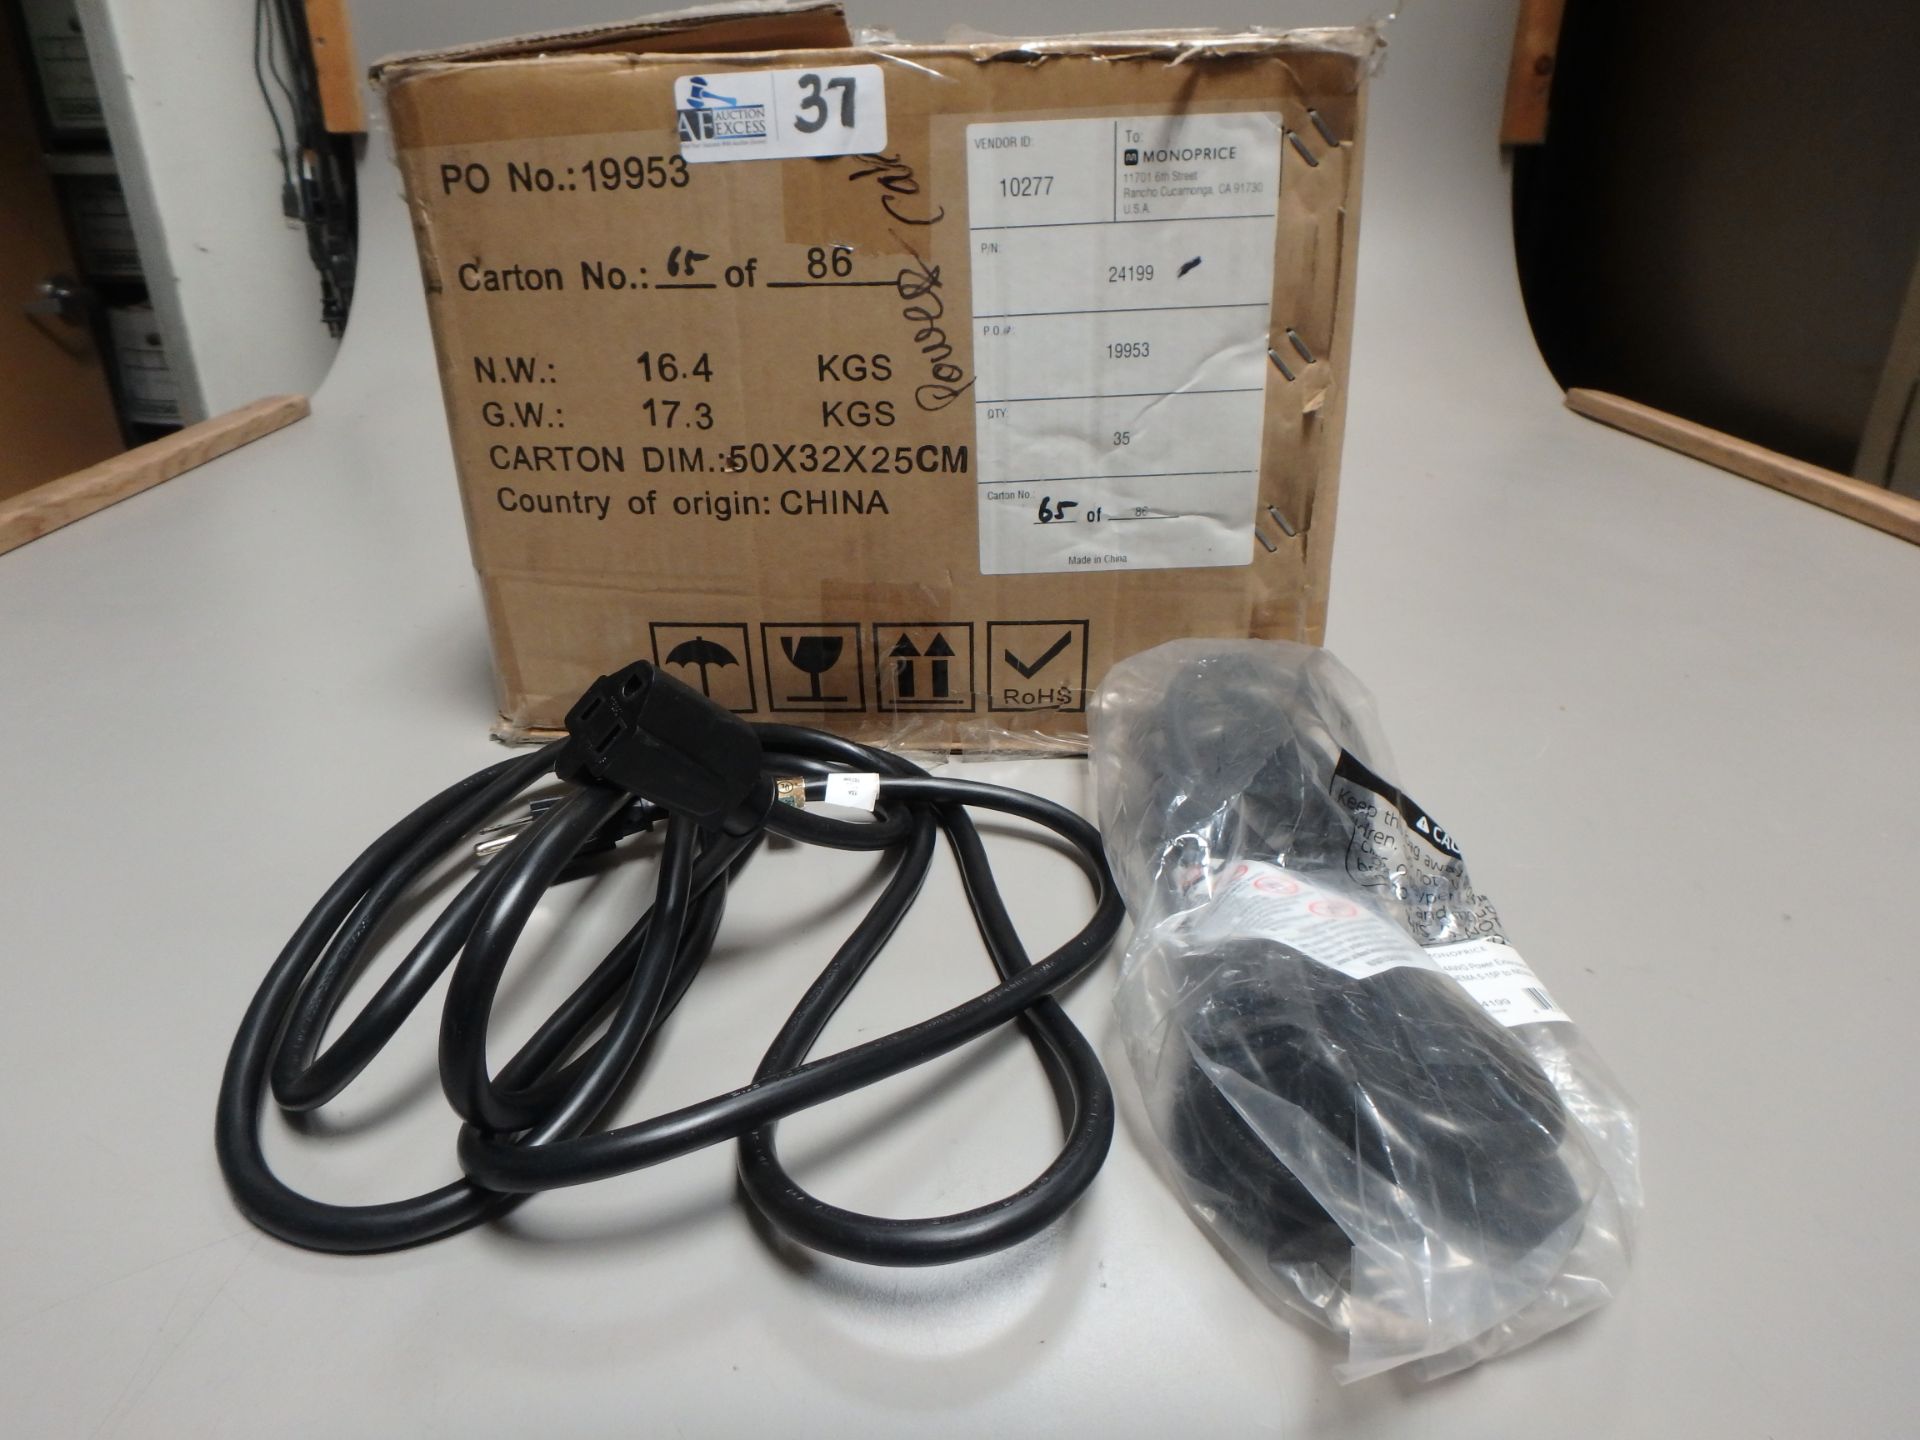 BOX MONOPRICE POWER EXTENSION CABLES